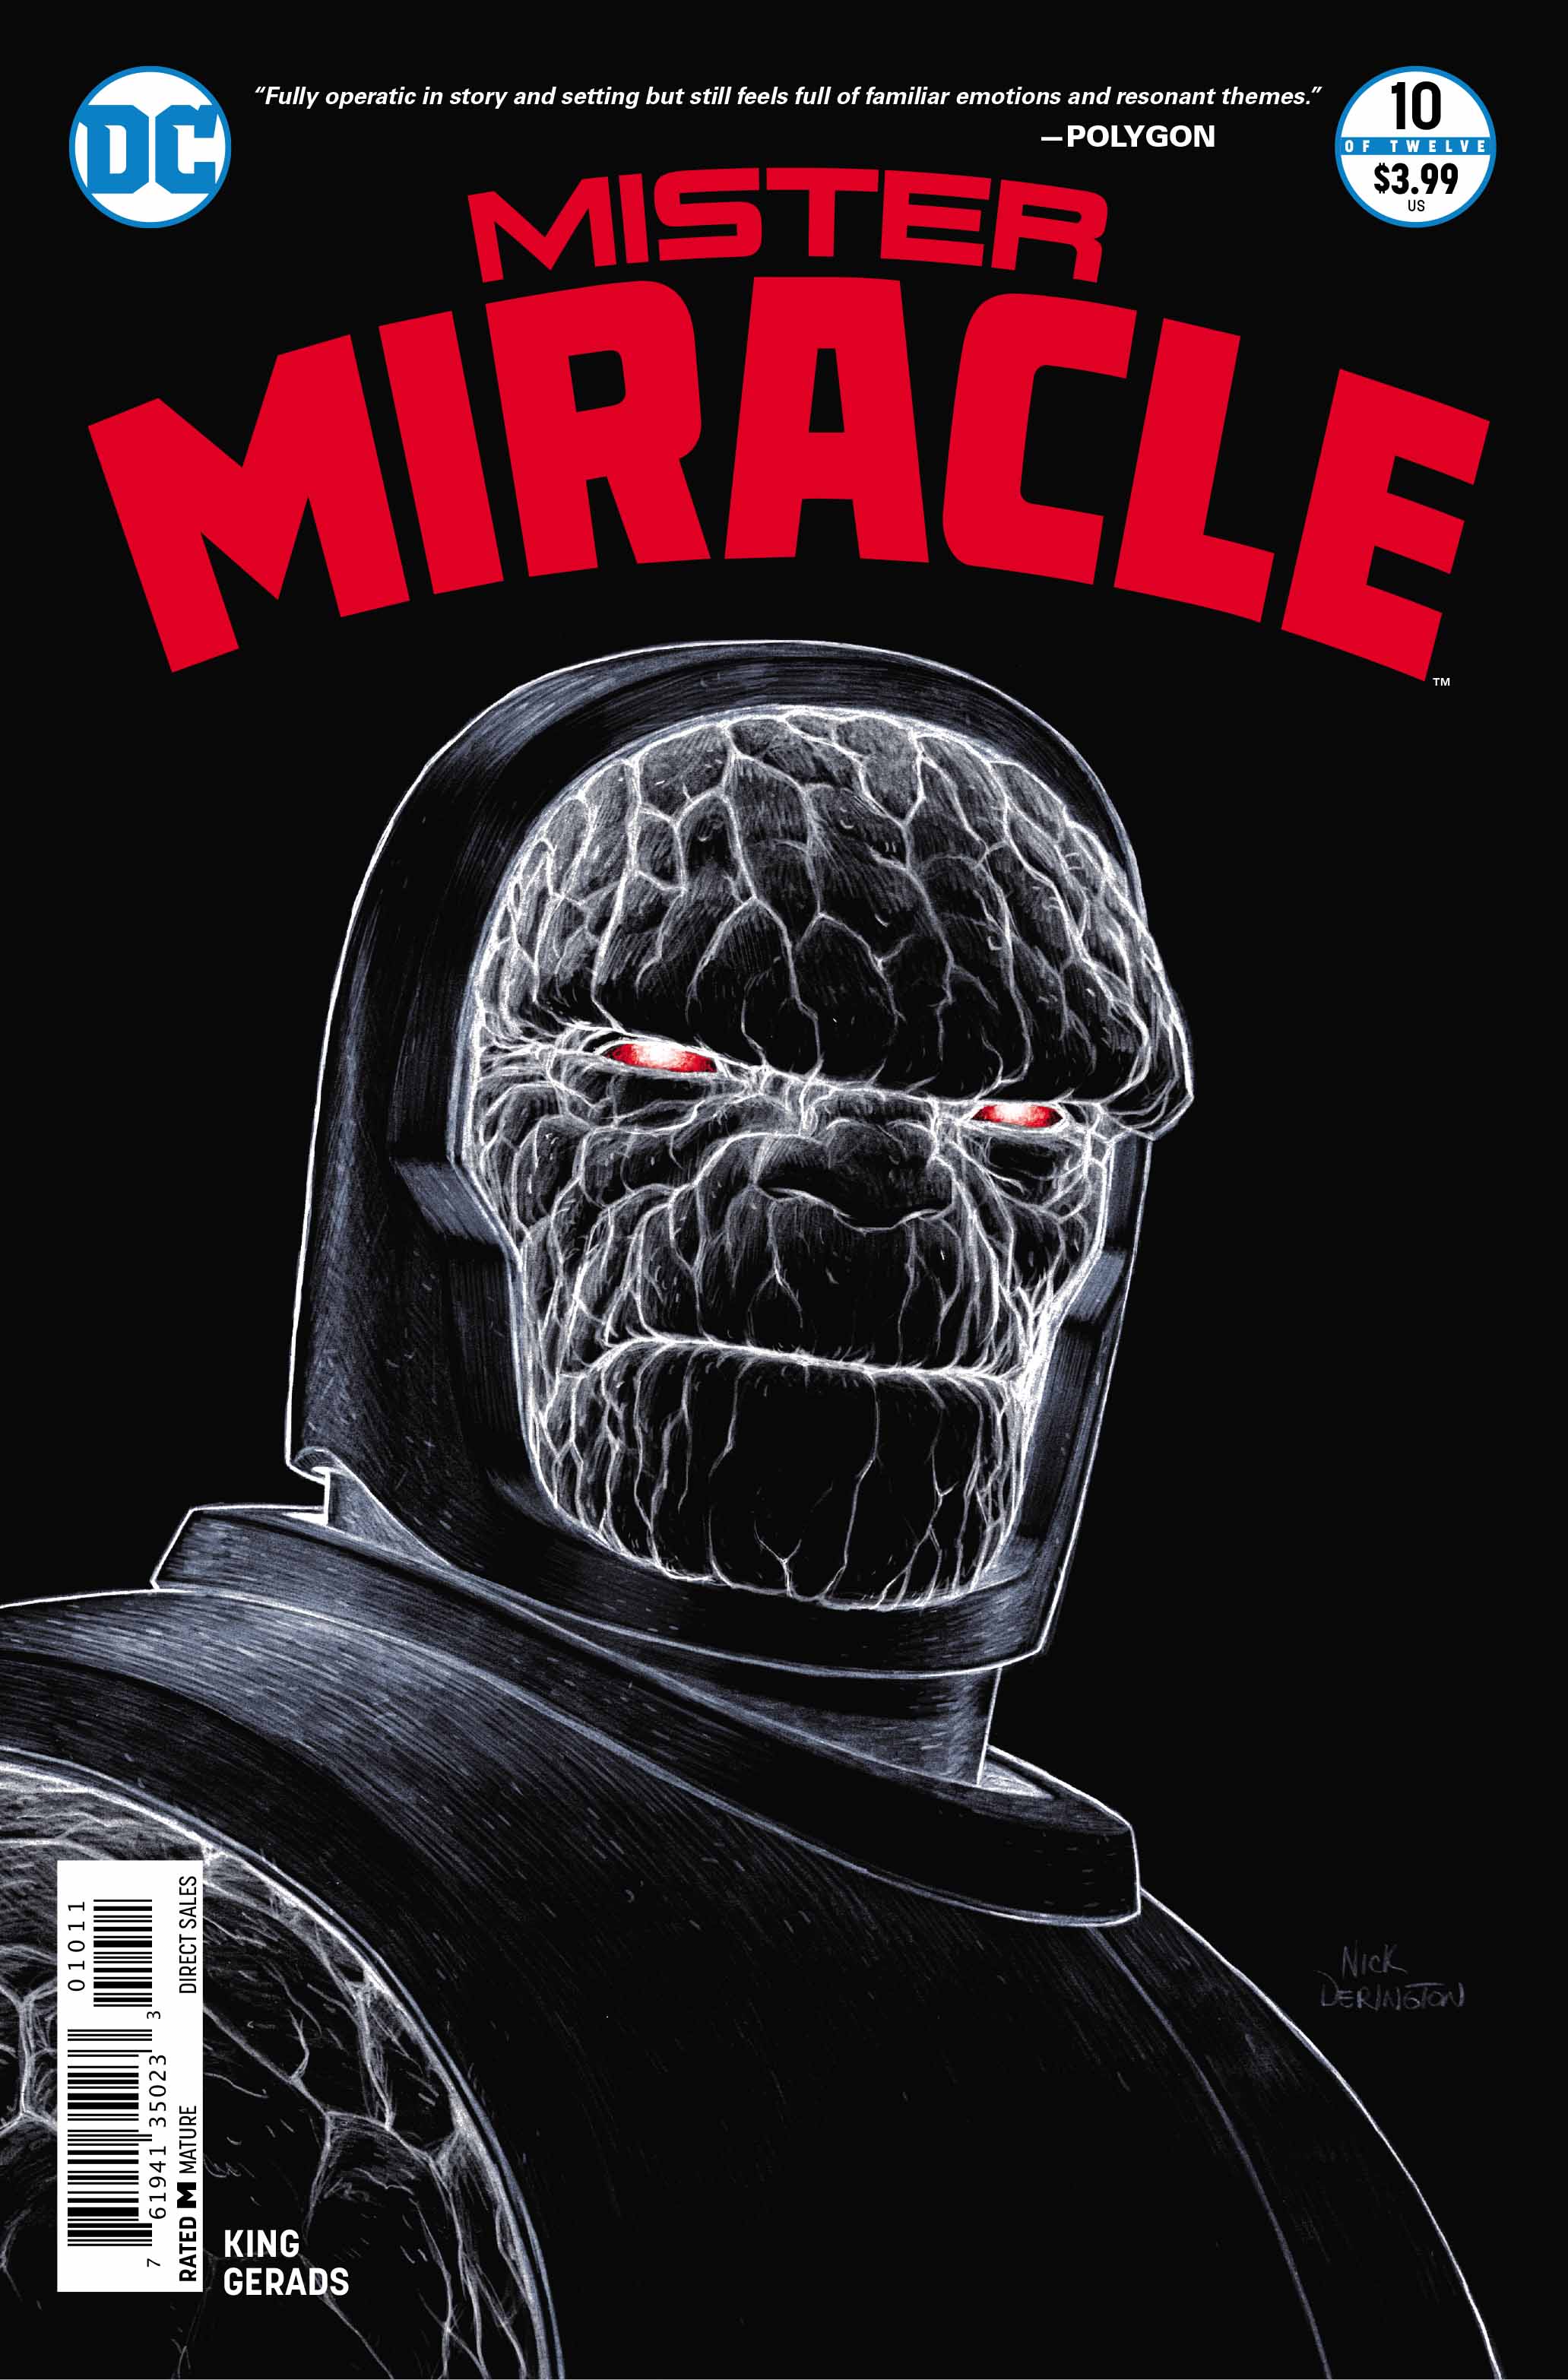 Mister Miracle #10